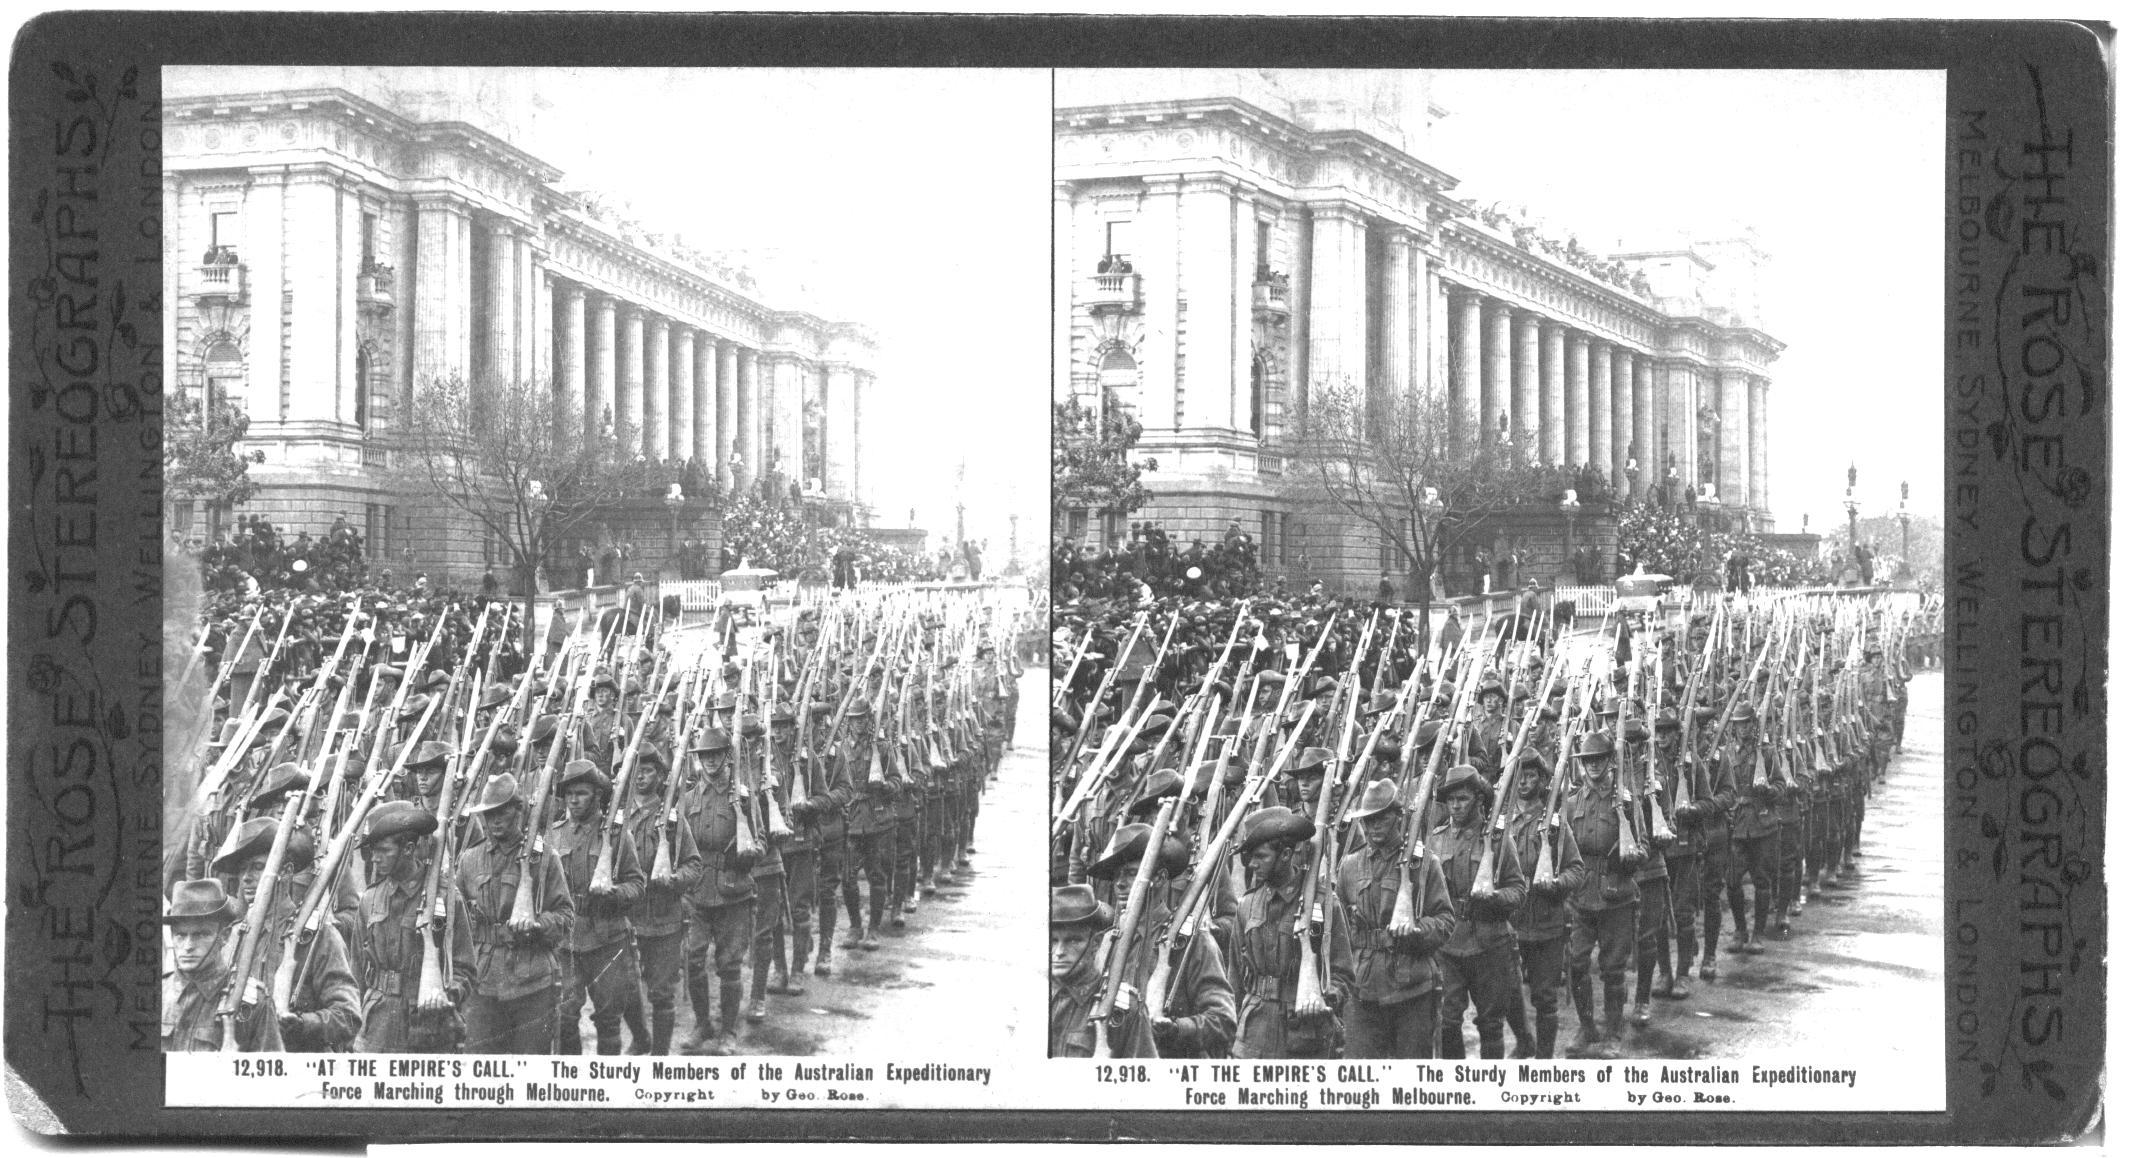 “AT THE EMPIRE’S CALL.” The Sturdy Members of the Australian Expeditionary Force Marching through Melbourne.